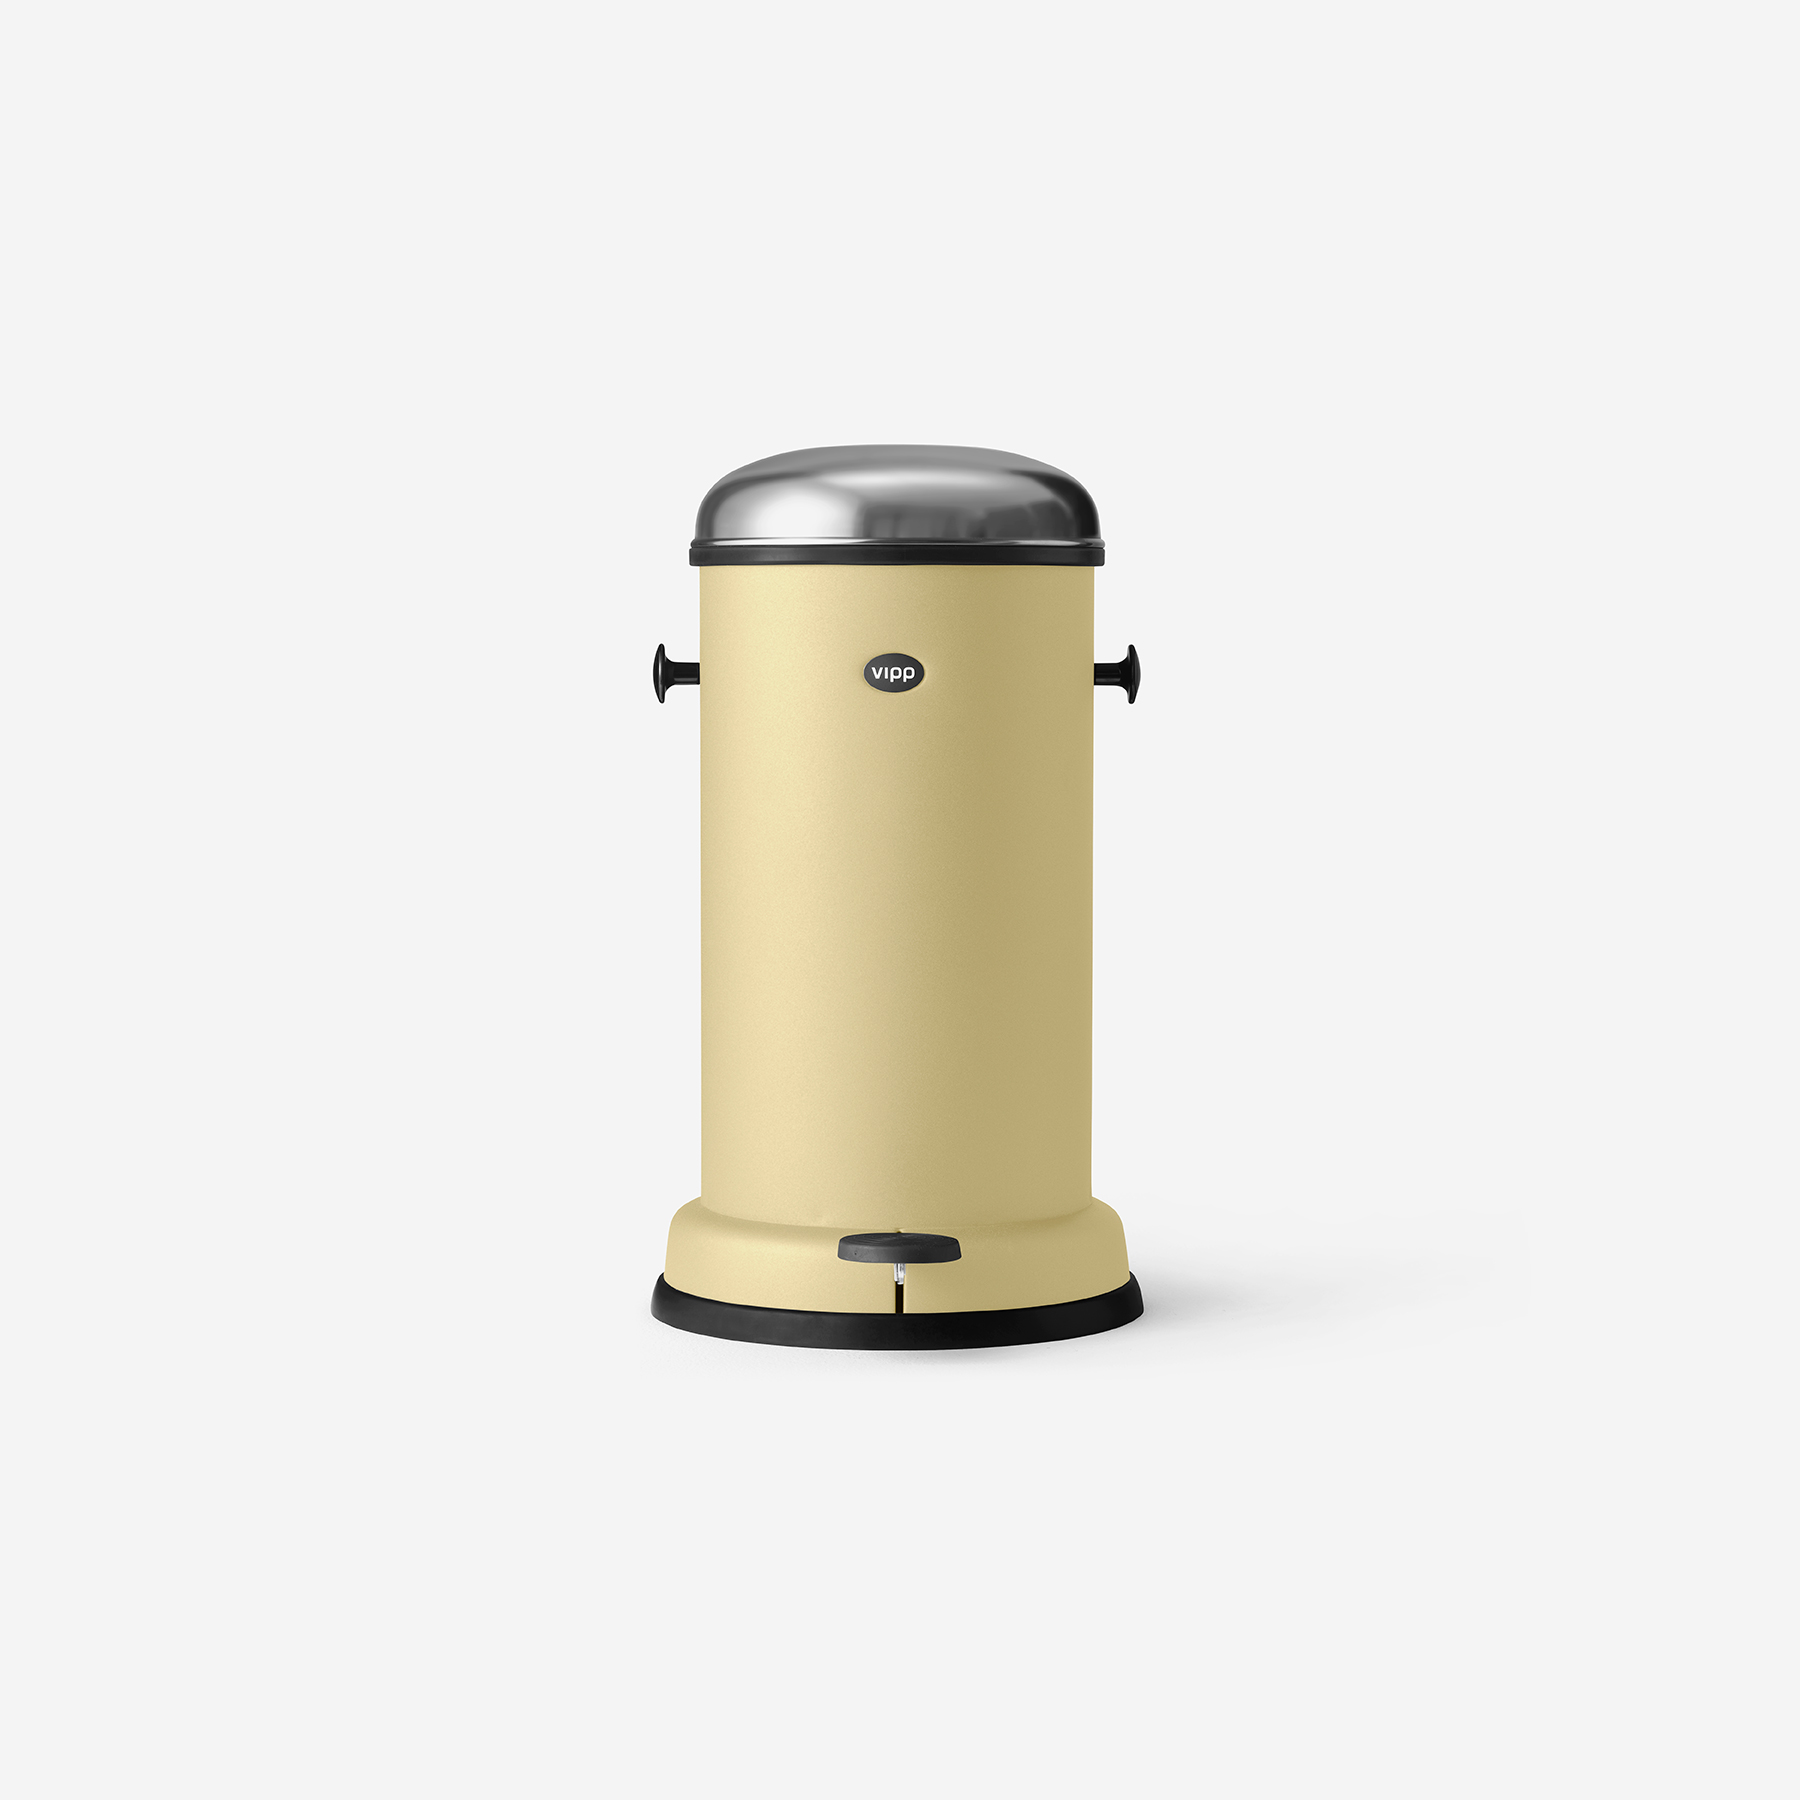 Vipp 15 pedal bin maries yellow front view